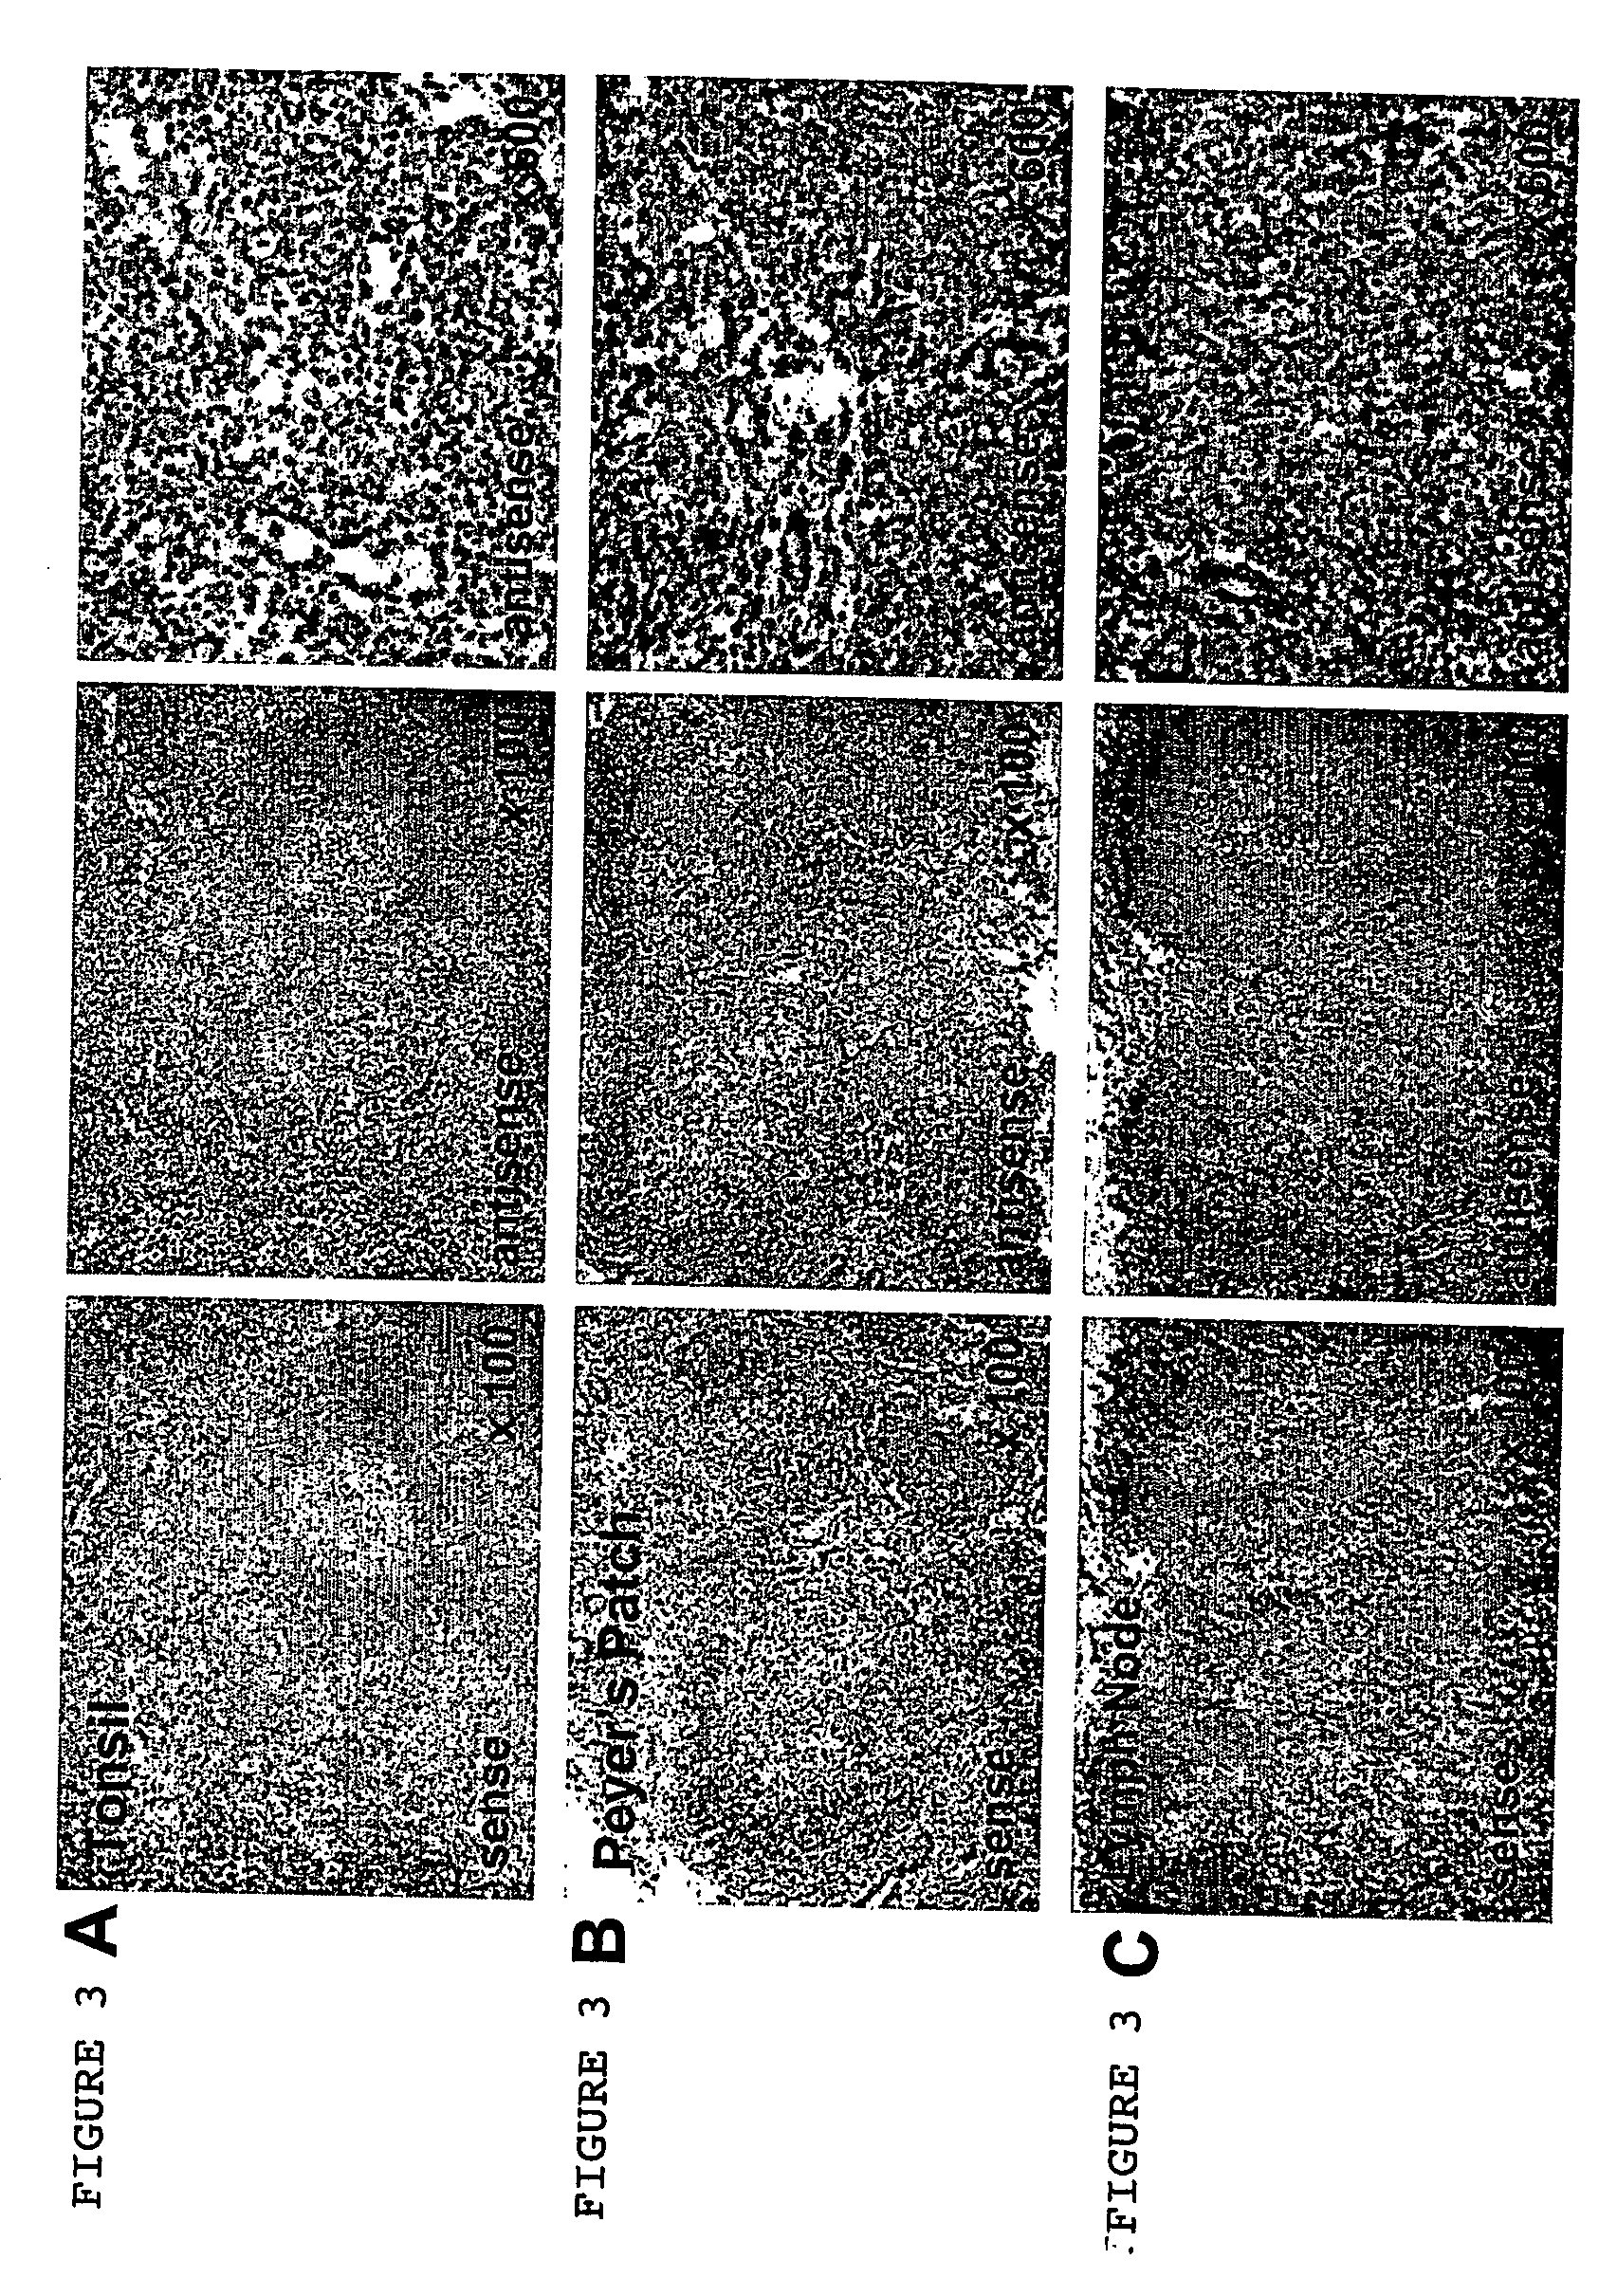 Nf-hev compositions and methods of use